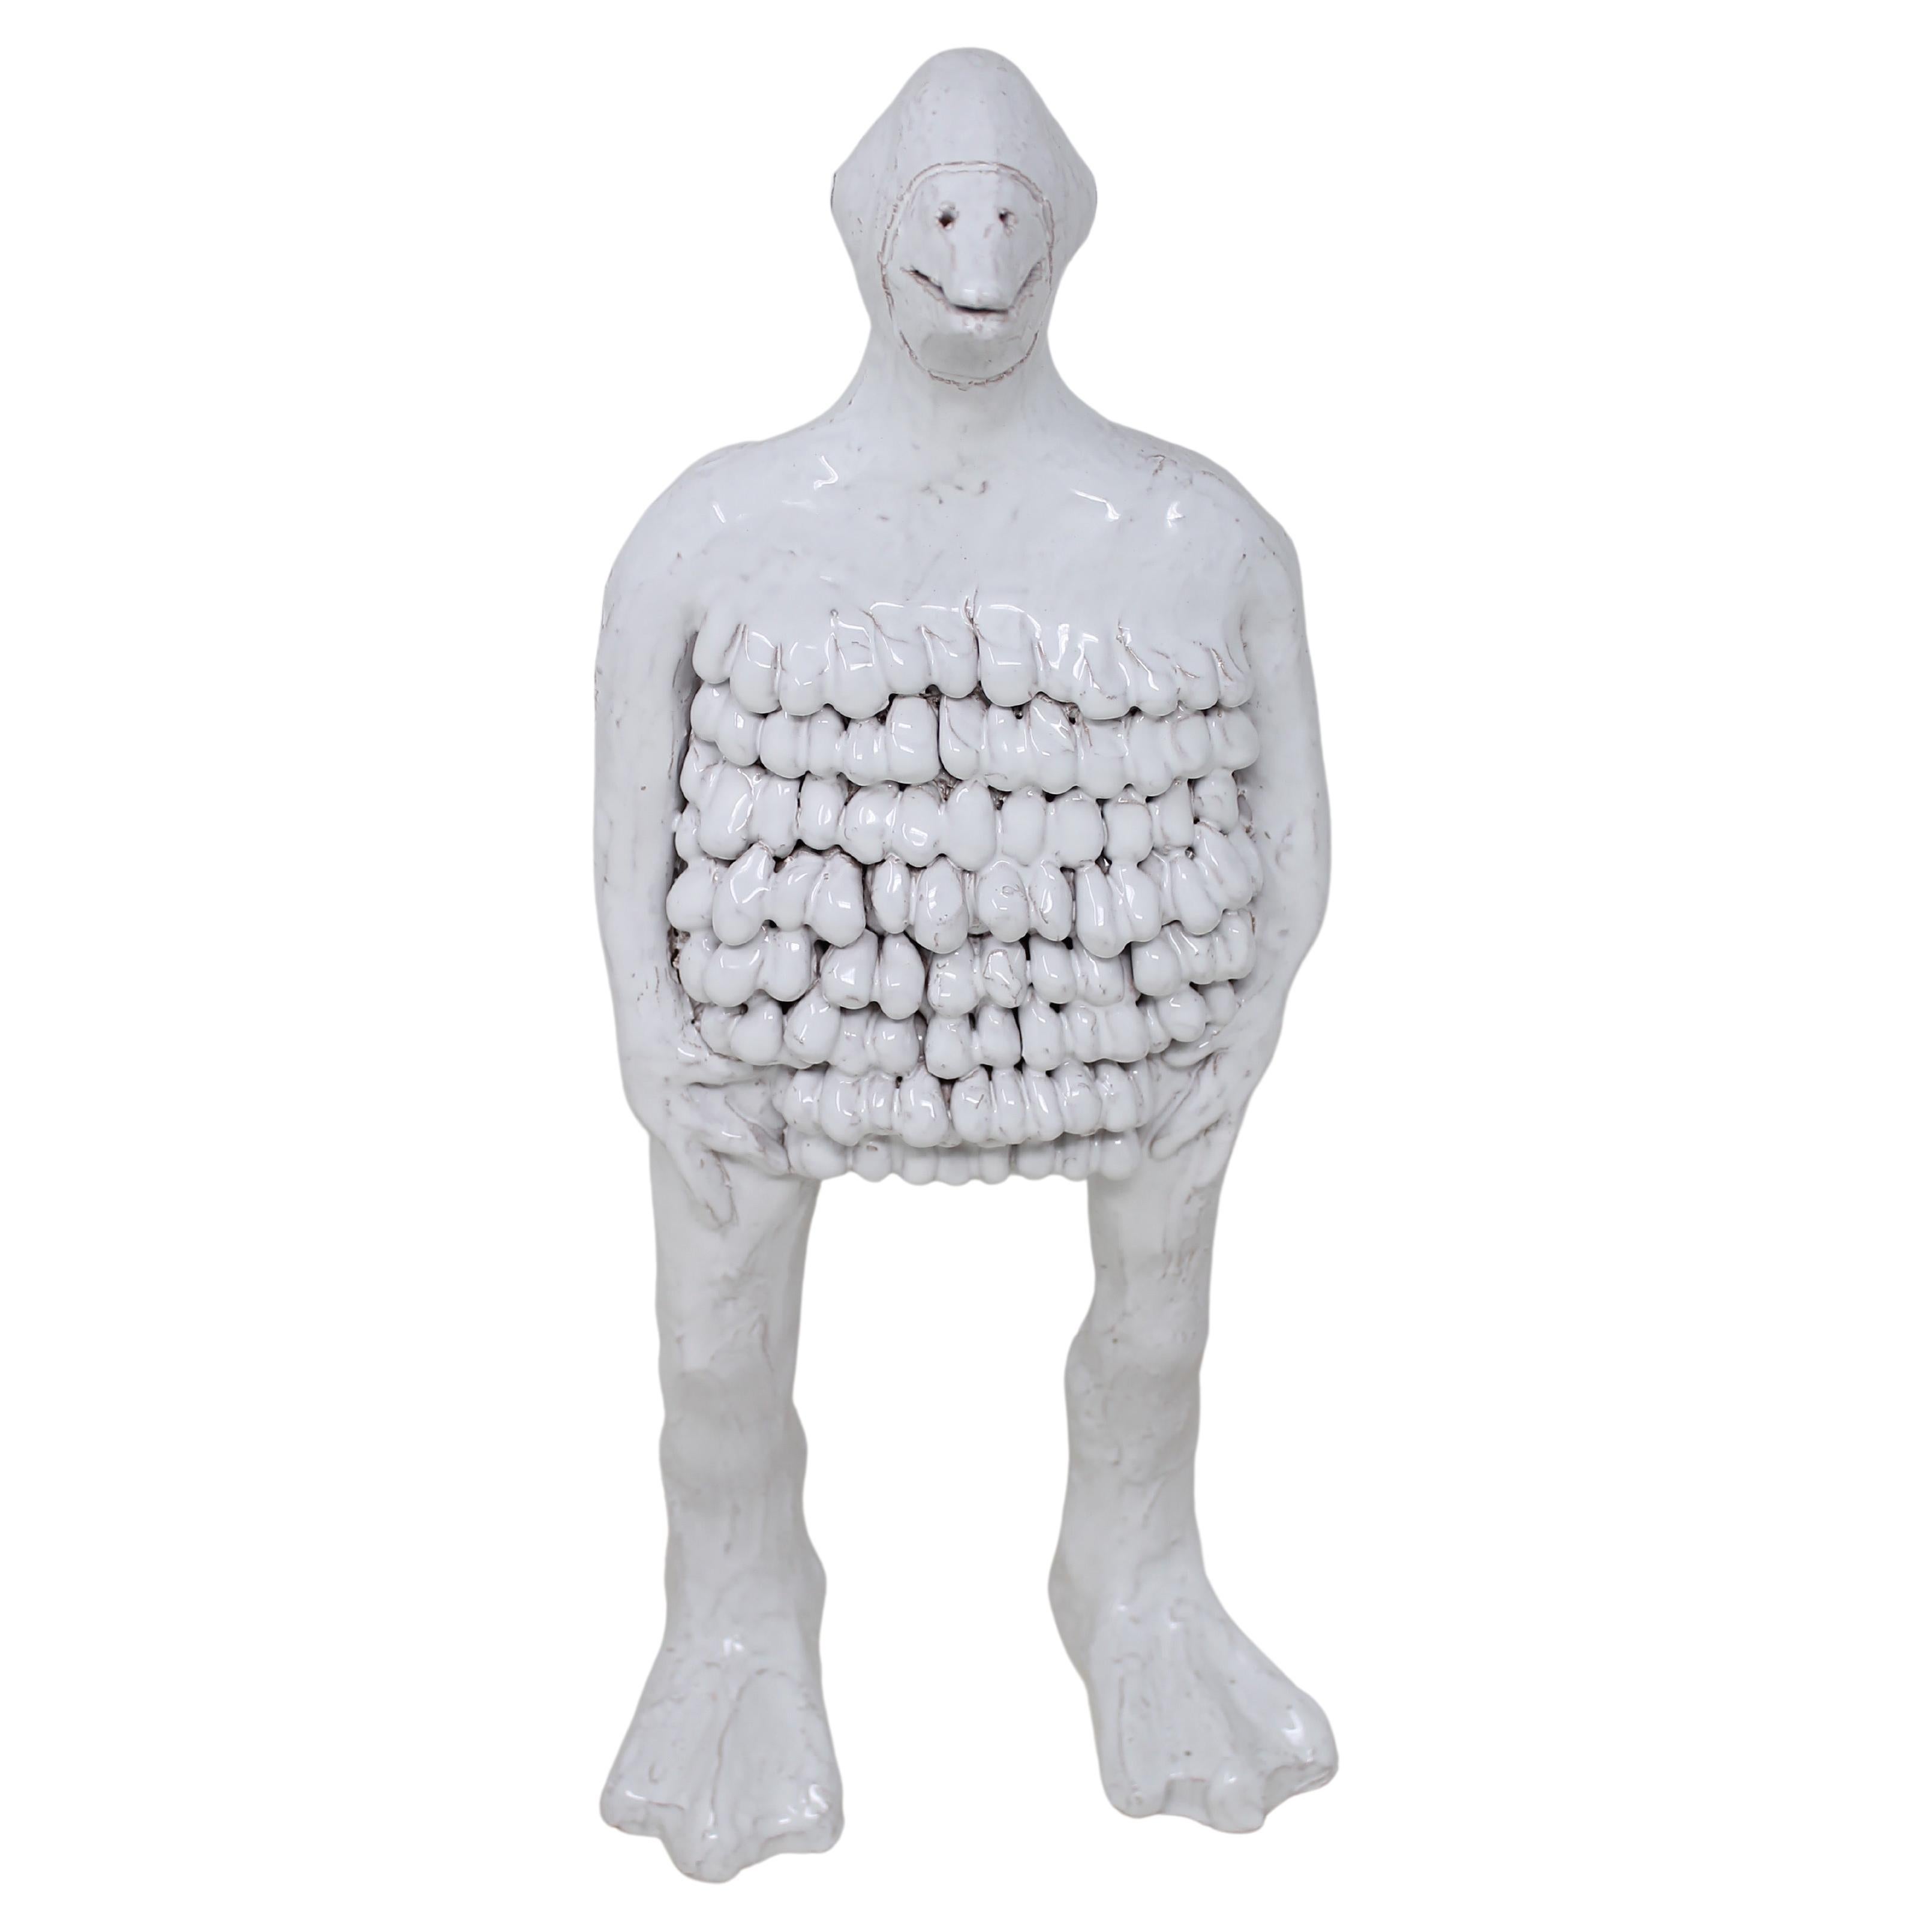 Freaklab Big Humans Made Entirely by Hand in Ceramic, Man-Woman Bird For Sale